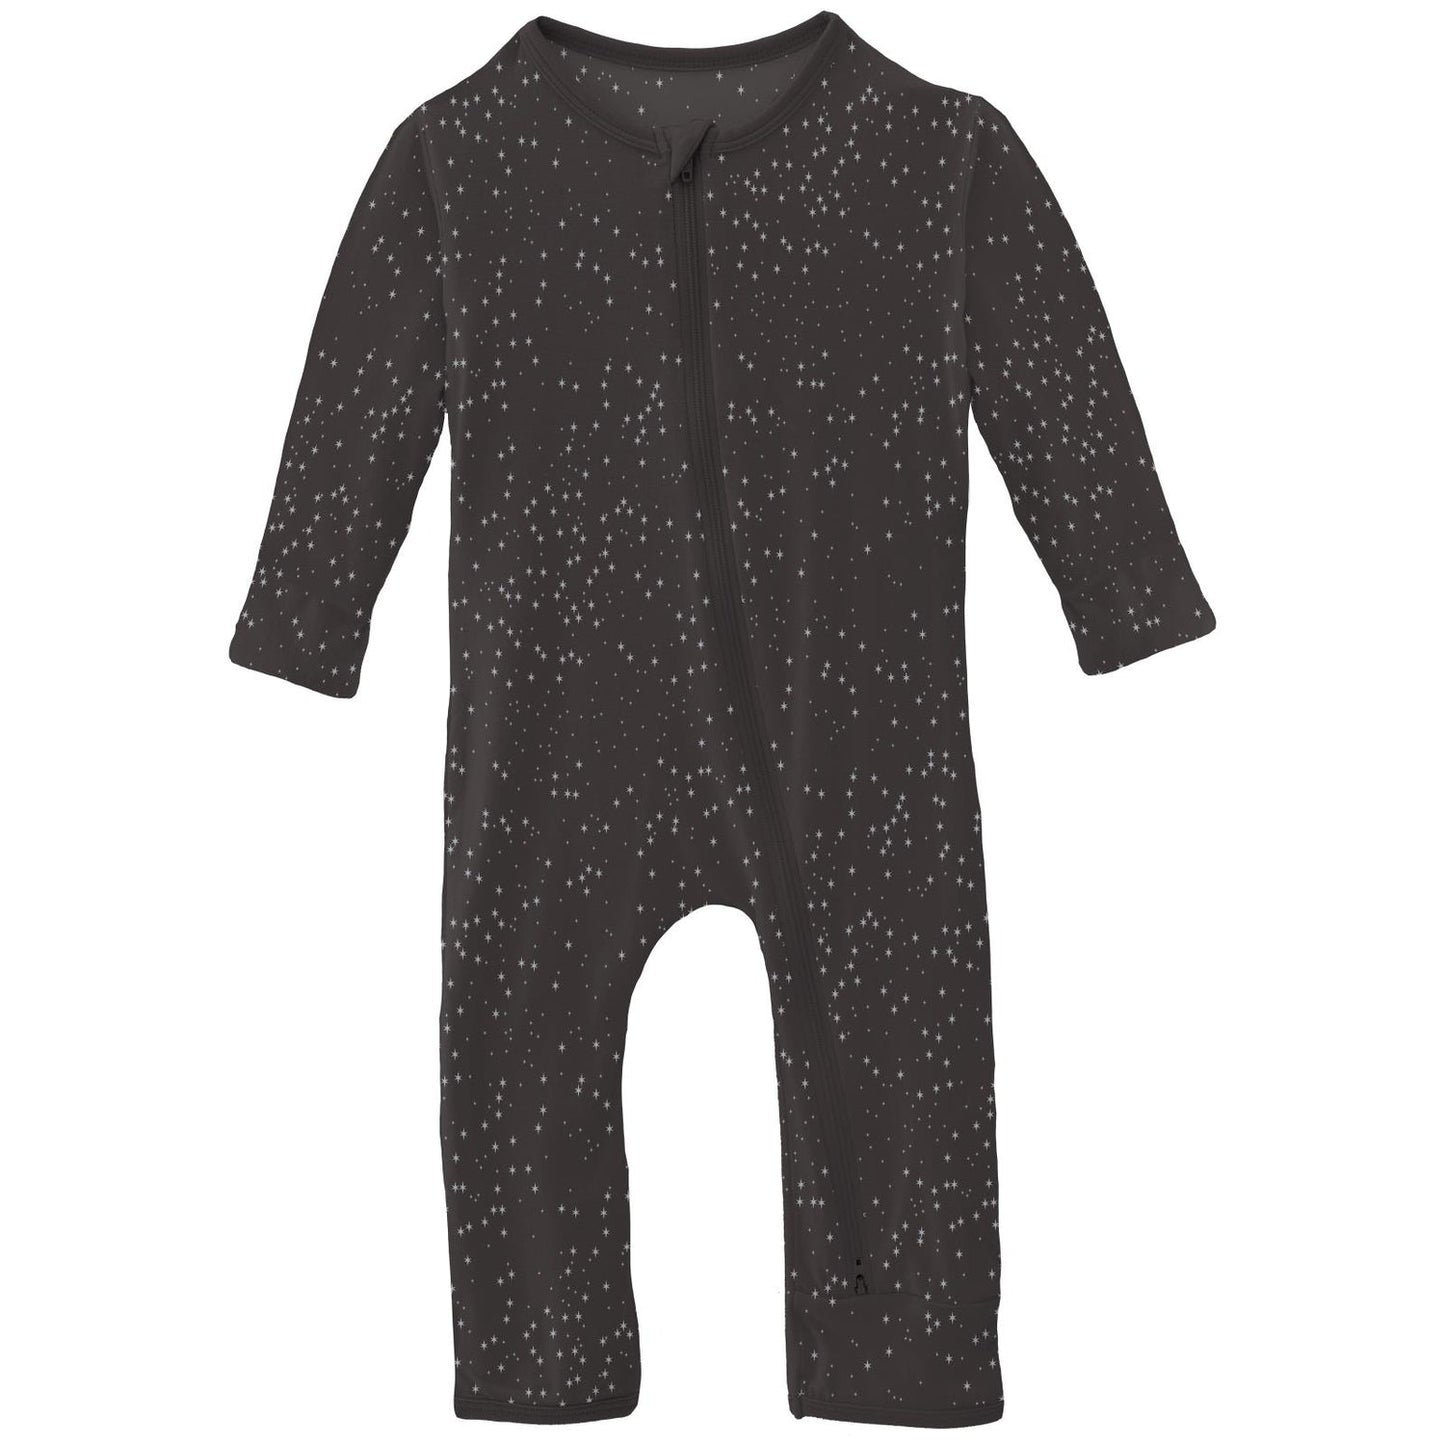 Print Coverall with 2 Way Zipper | Midnight Foil Constellations